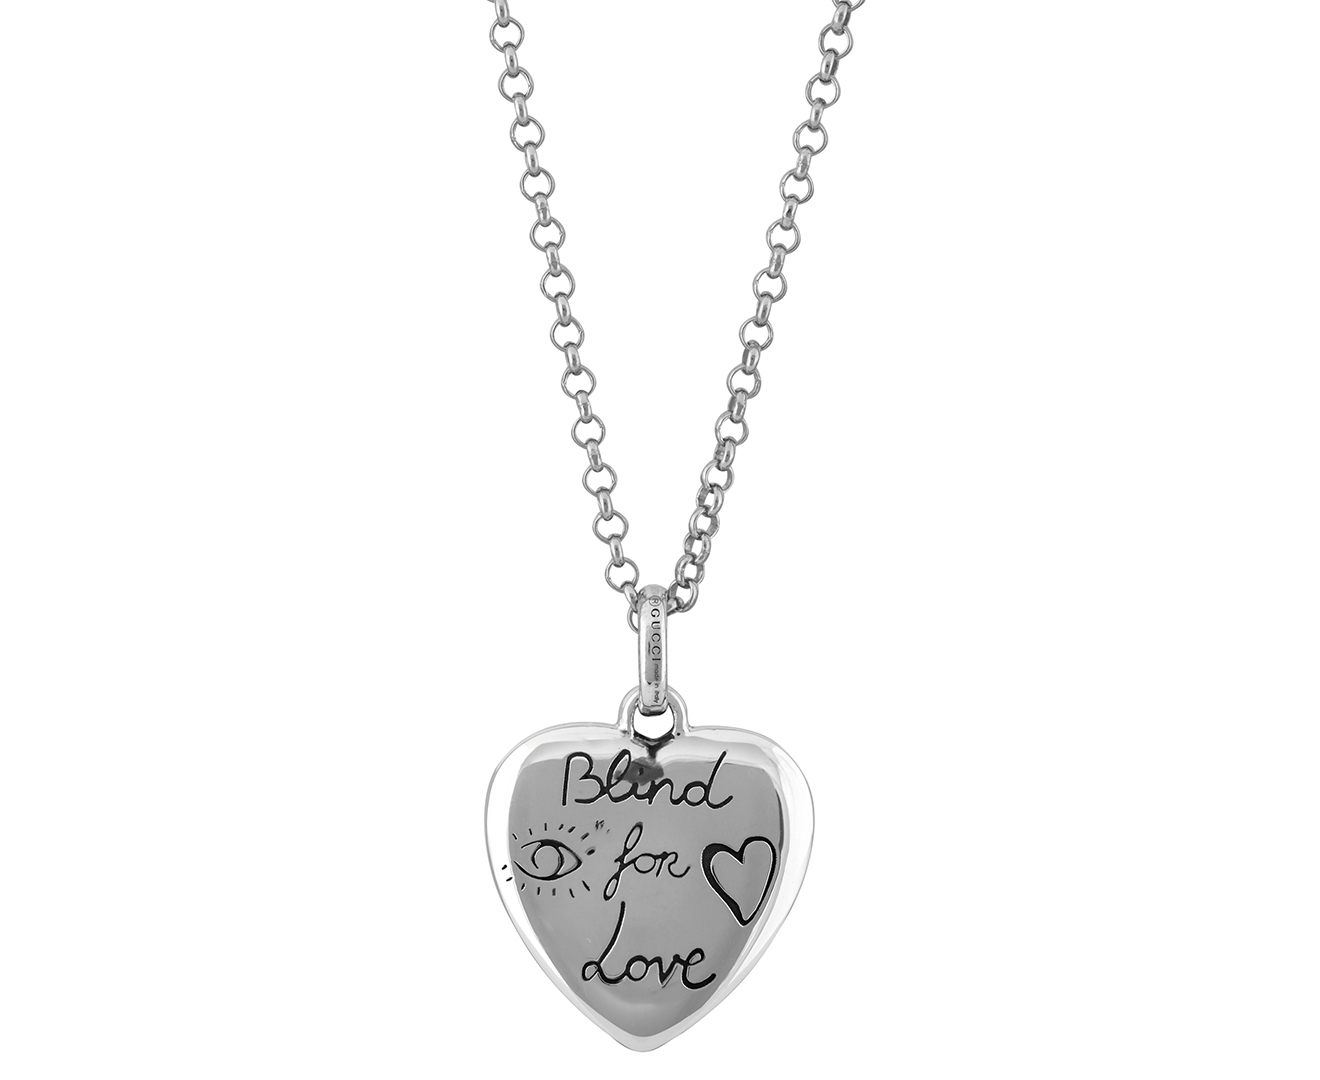 Gucci Blind For Love Necklace - Silver | Catch.co.nz